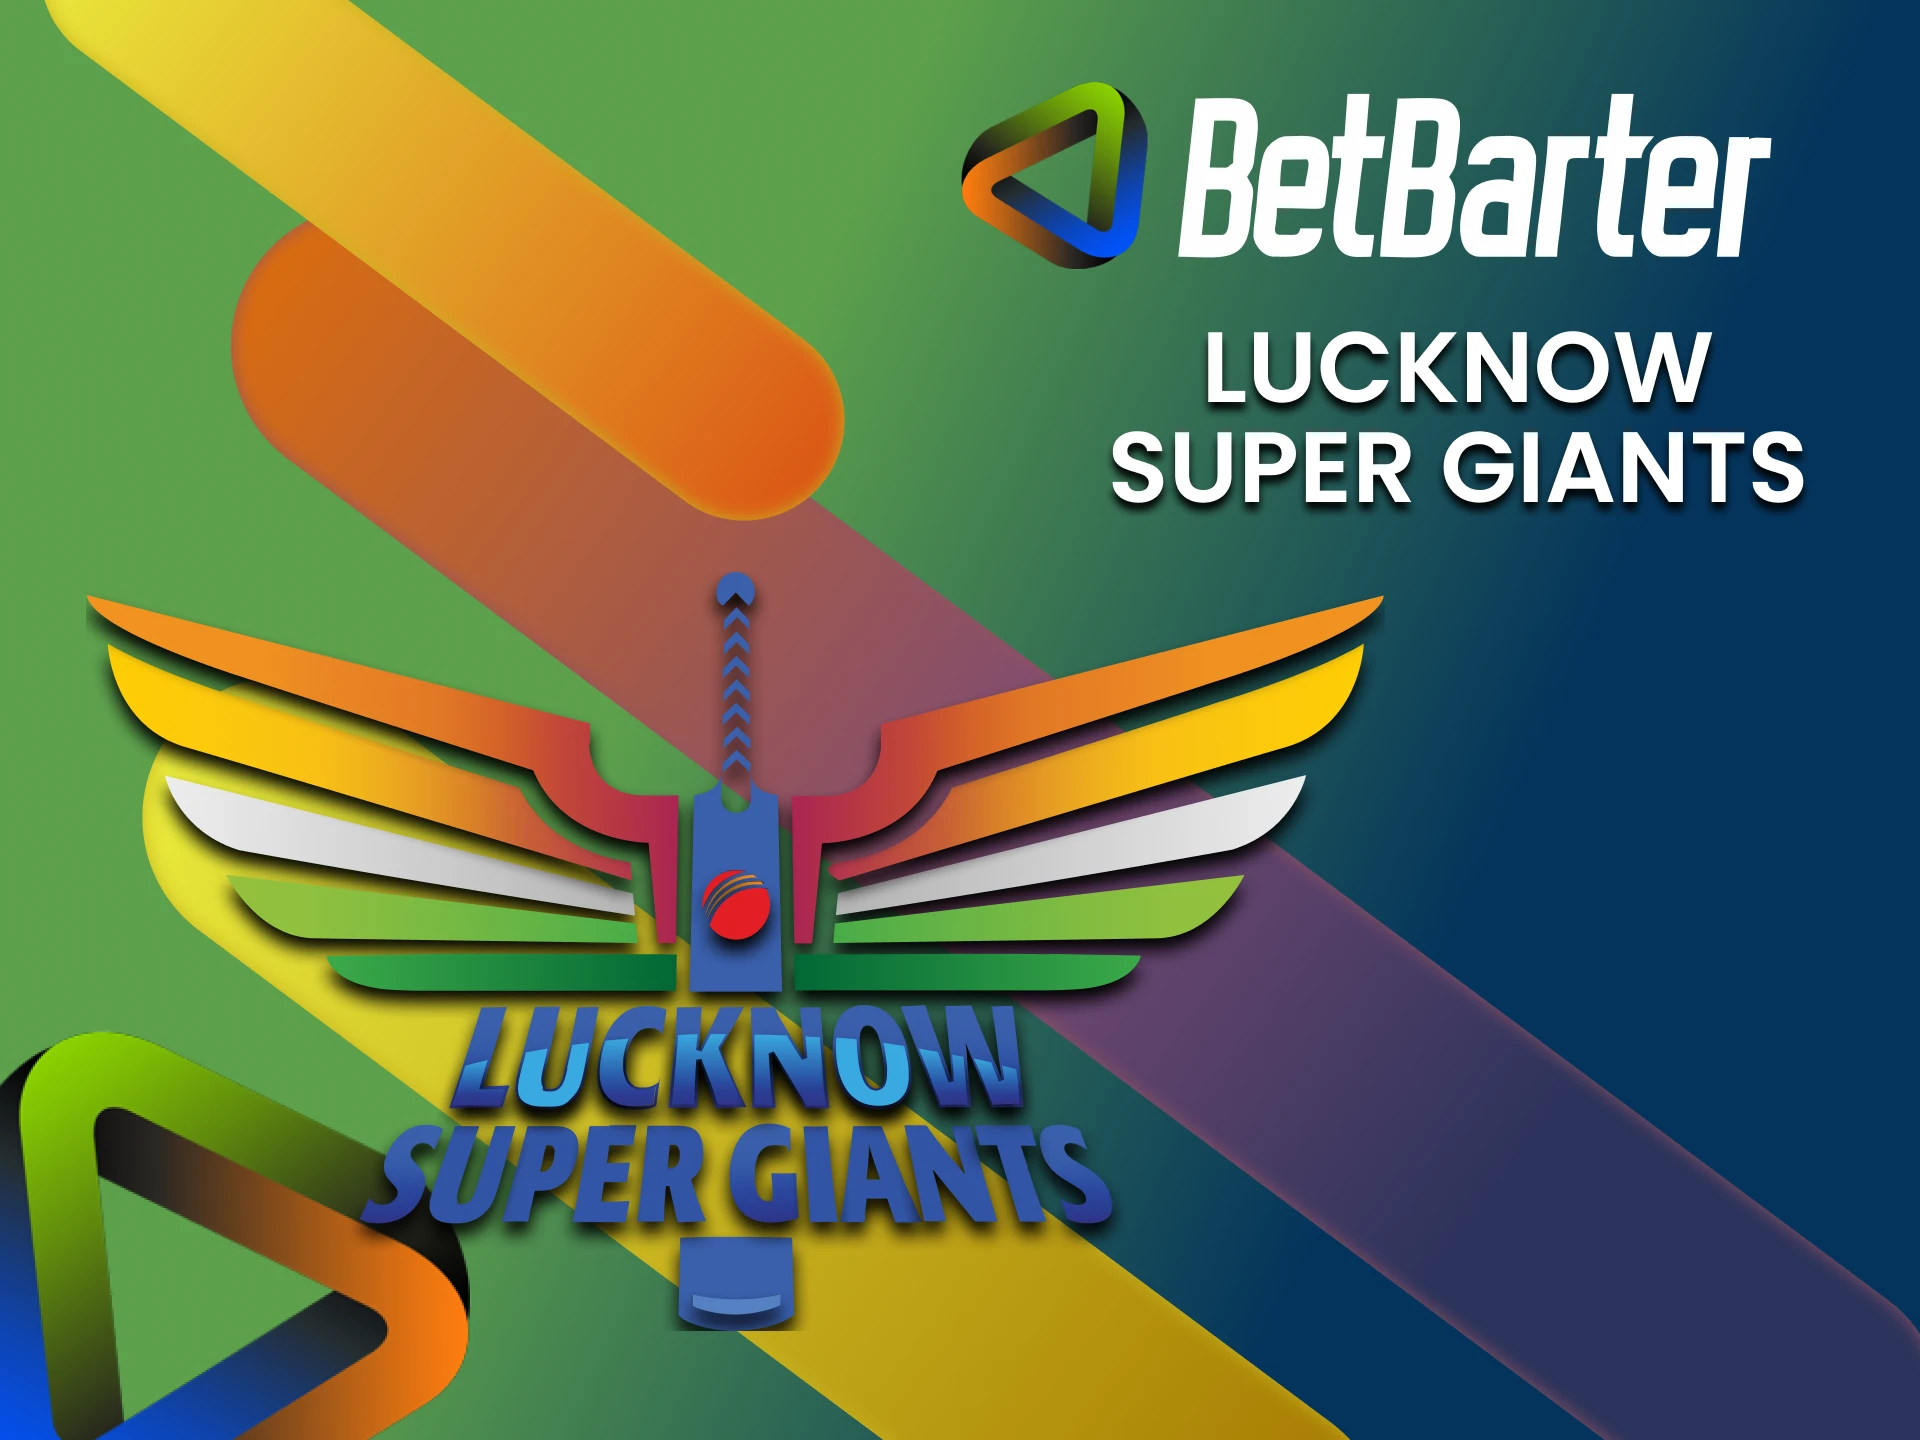 To bet on the IPL from BetBarter, choose the Lucknow Super Giants team.